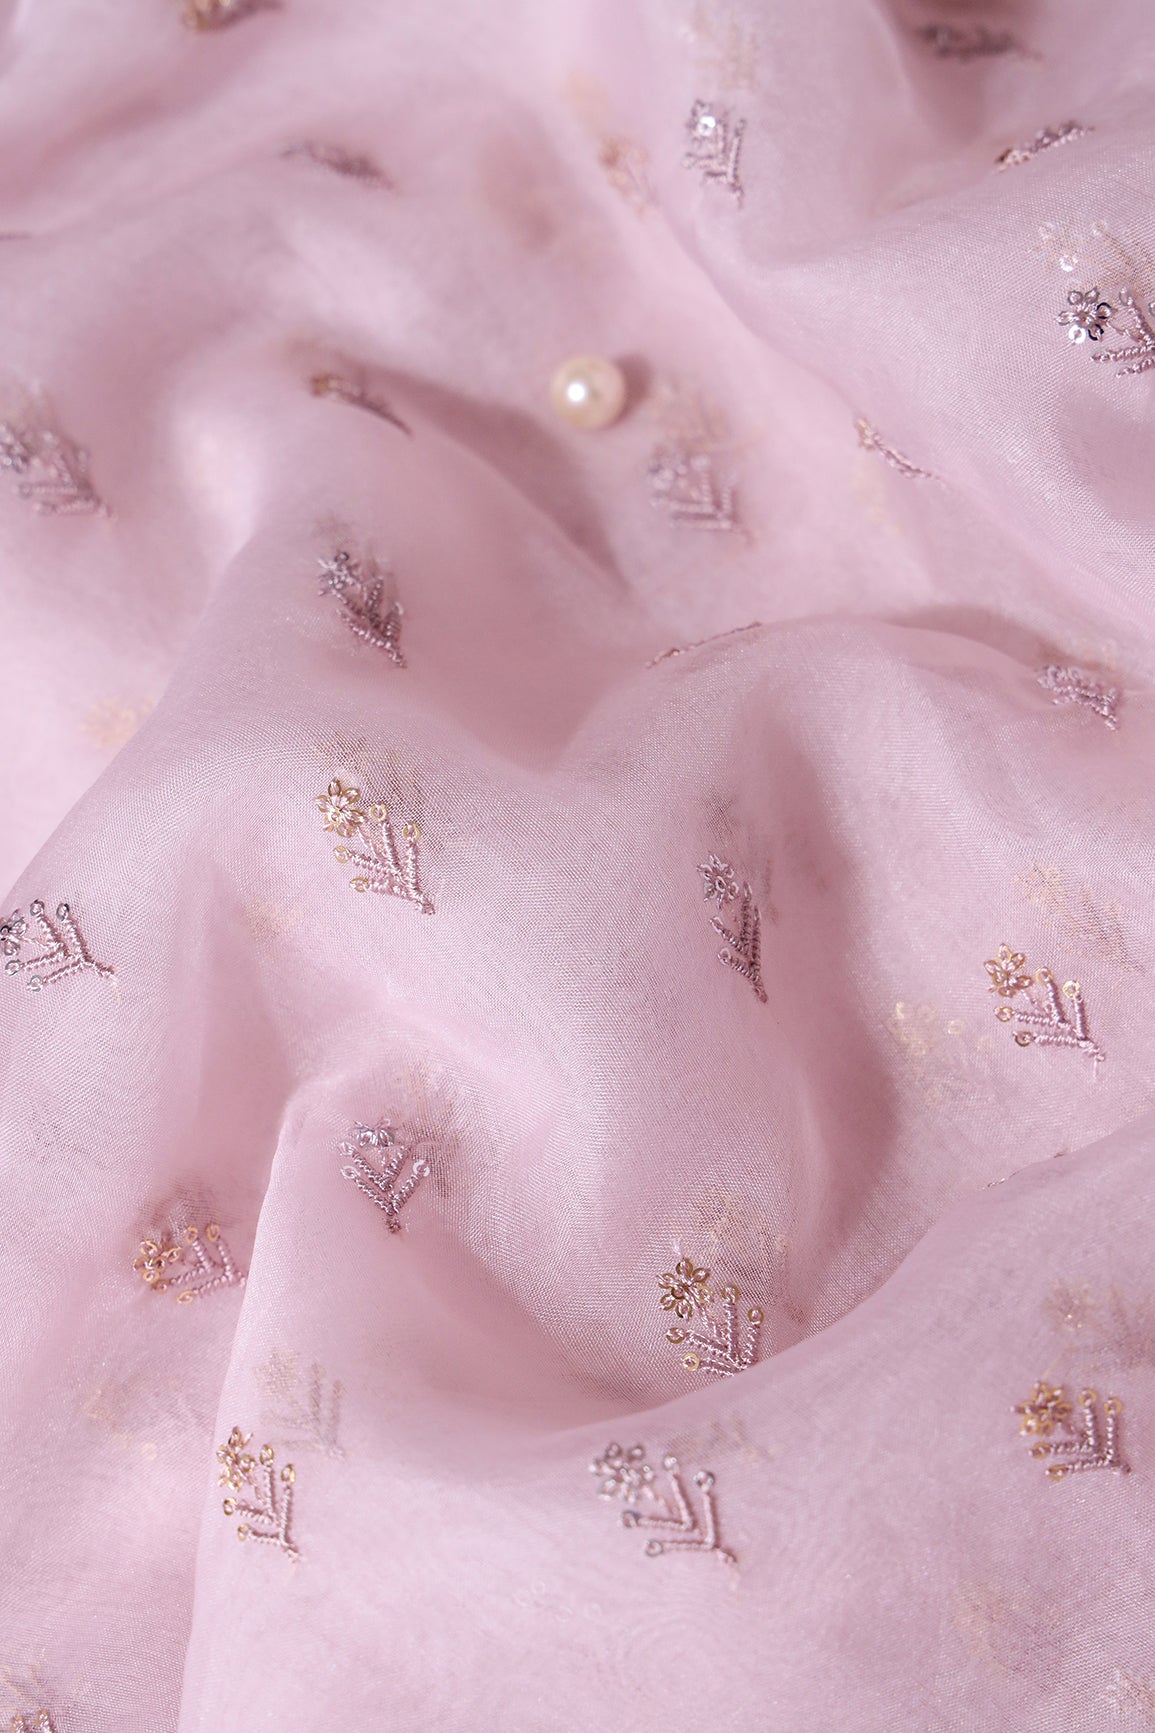 Gold And Silver Sequins Beautiful Small Floral Motif Embroidery Work On Pastel Pink Organza Fabric